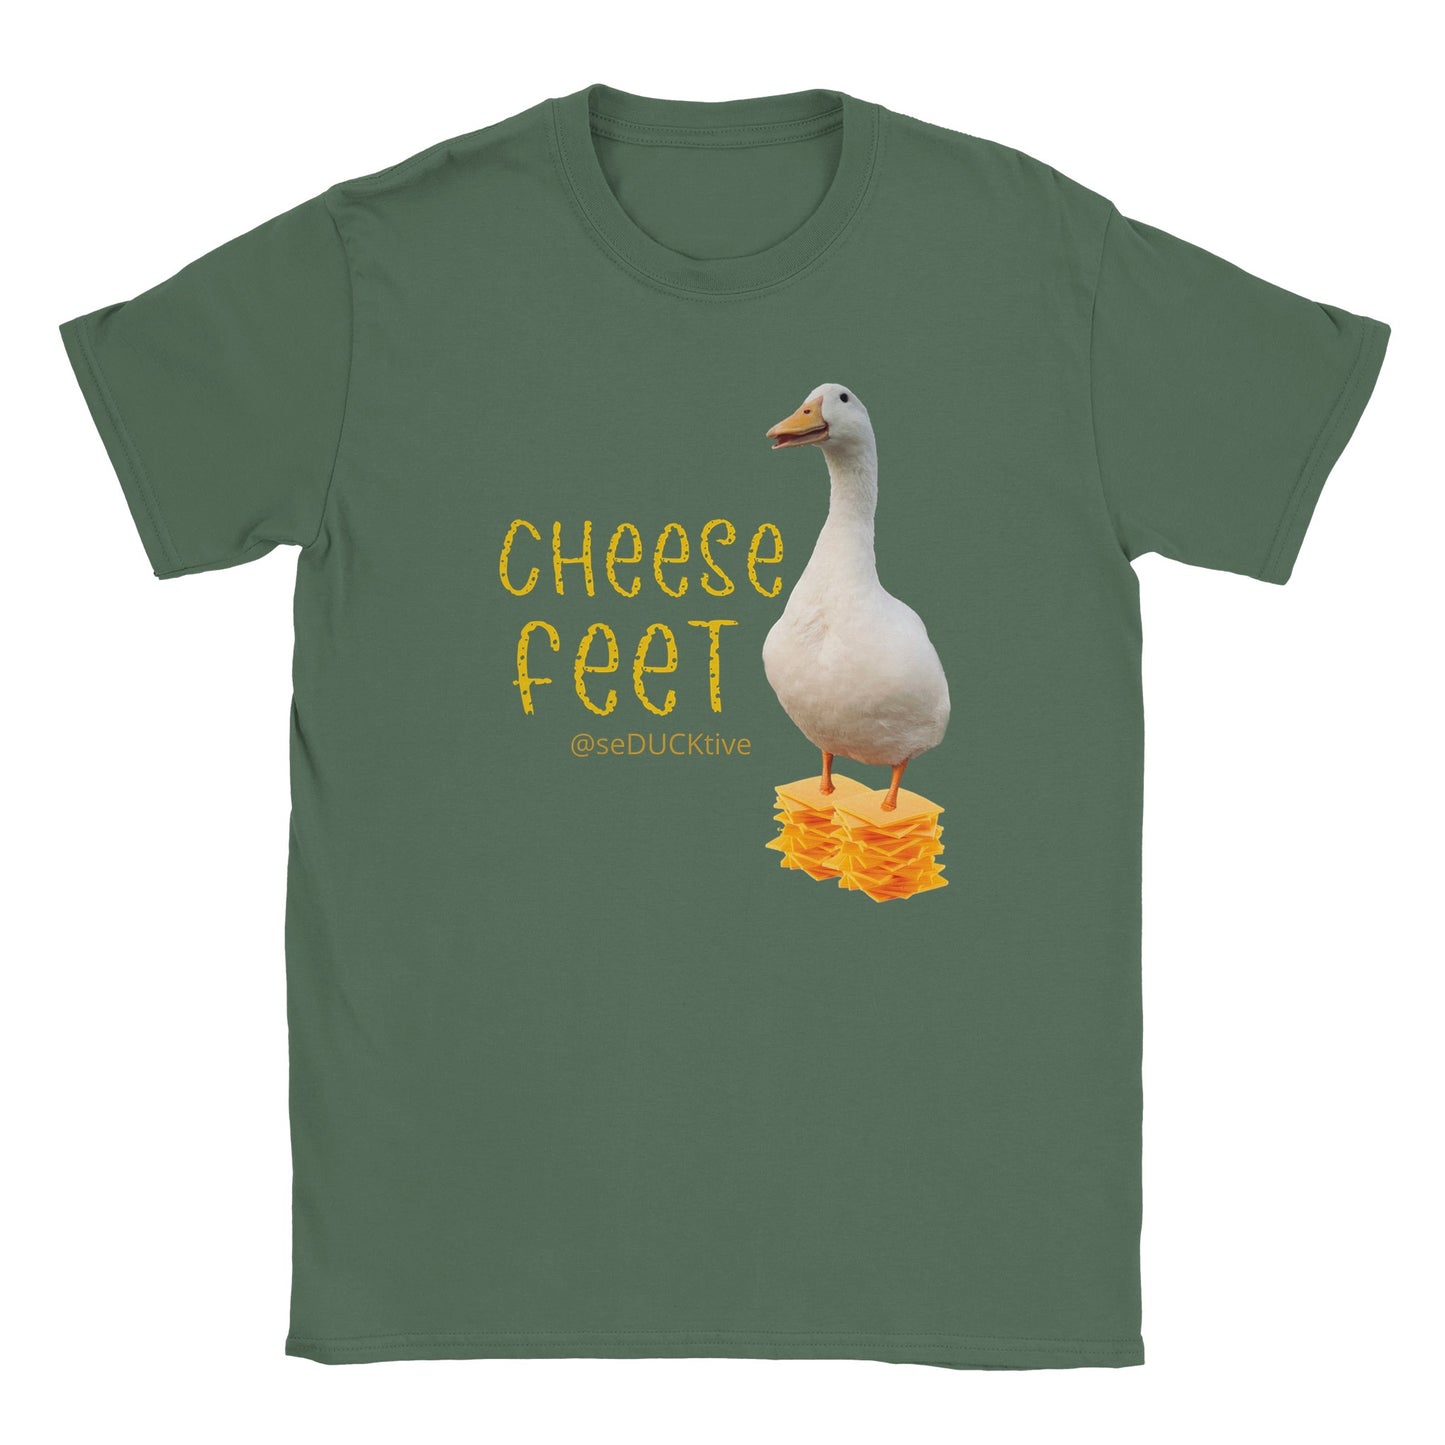 Cheese Feet T Shirt - stack of cheese